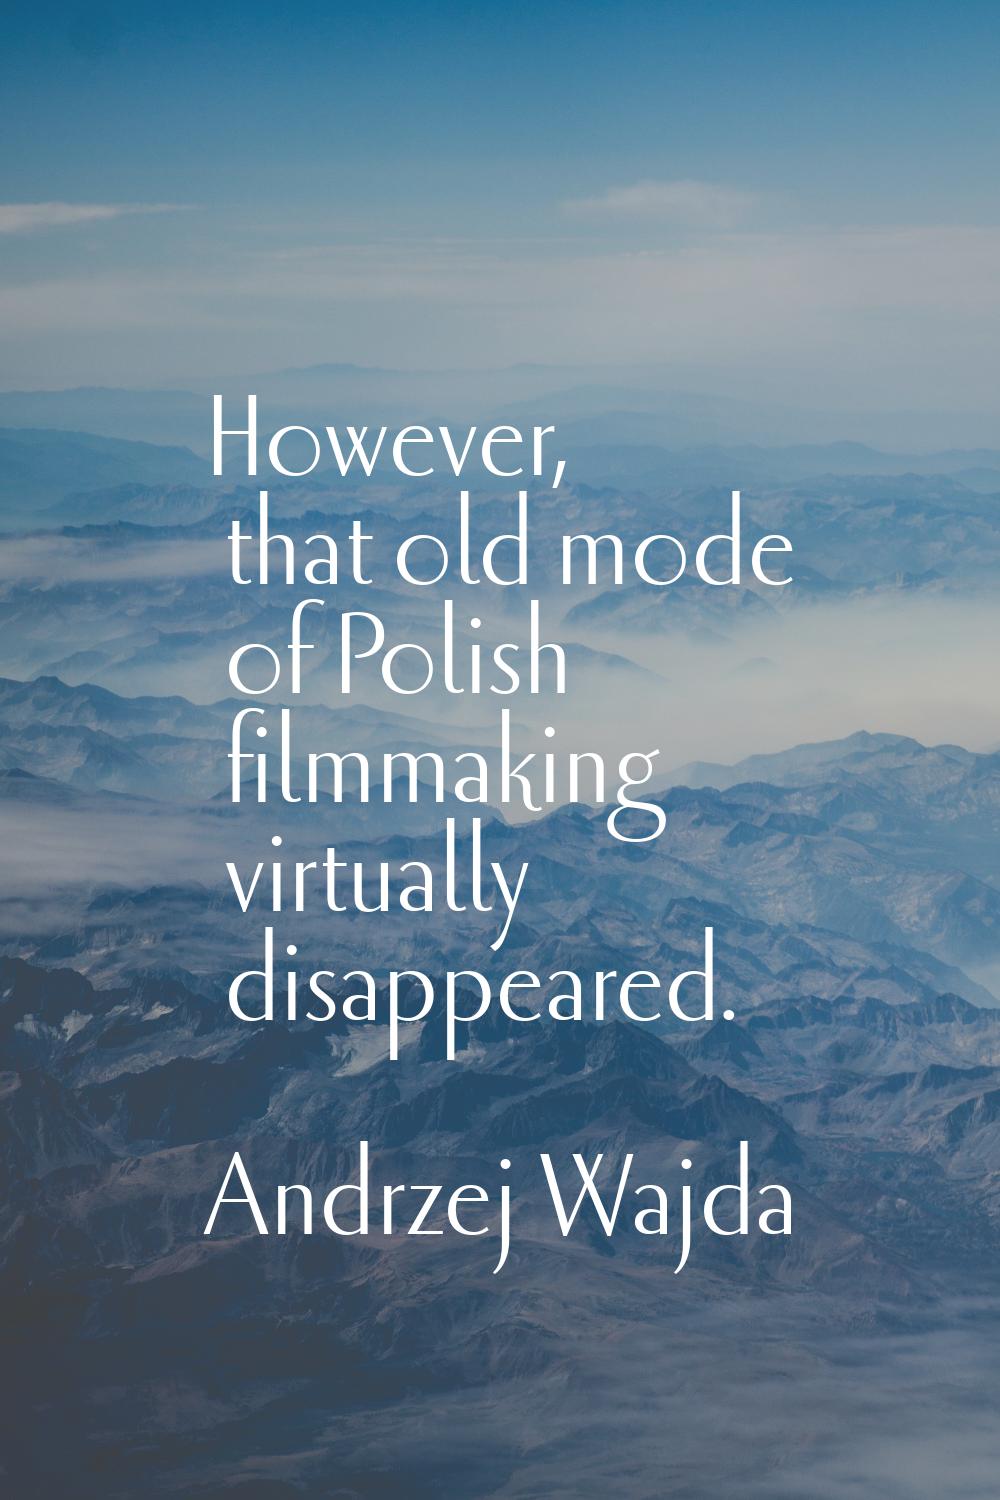 However, that old mode of Polish filmmaking virtually disappeared.